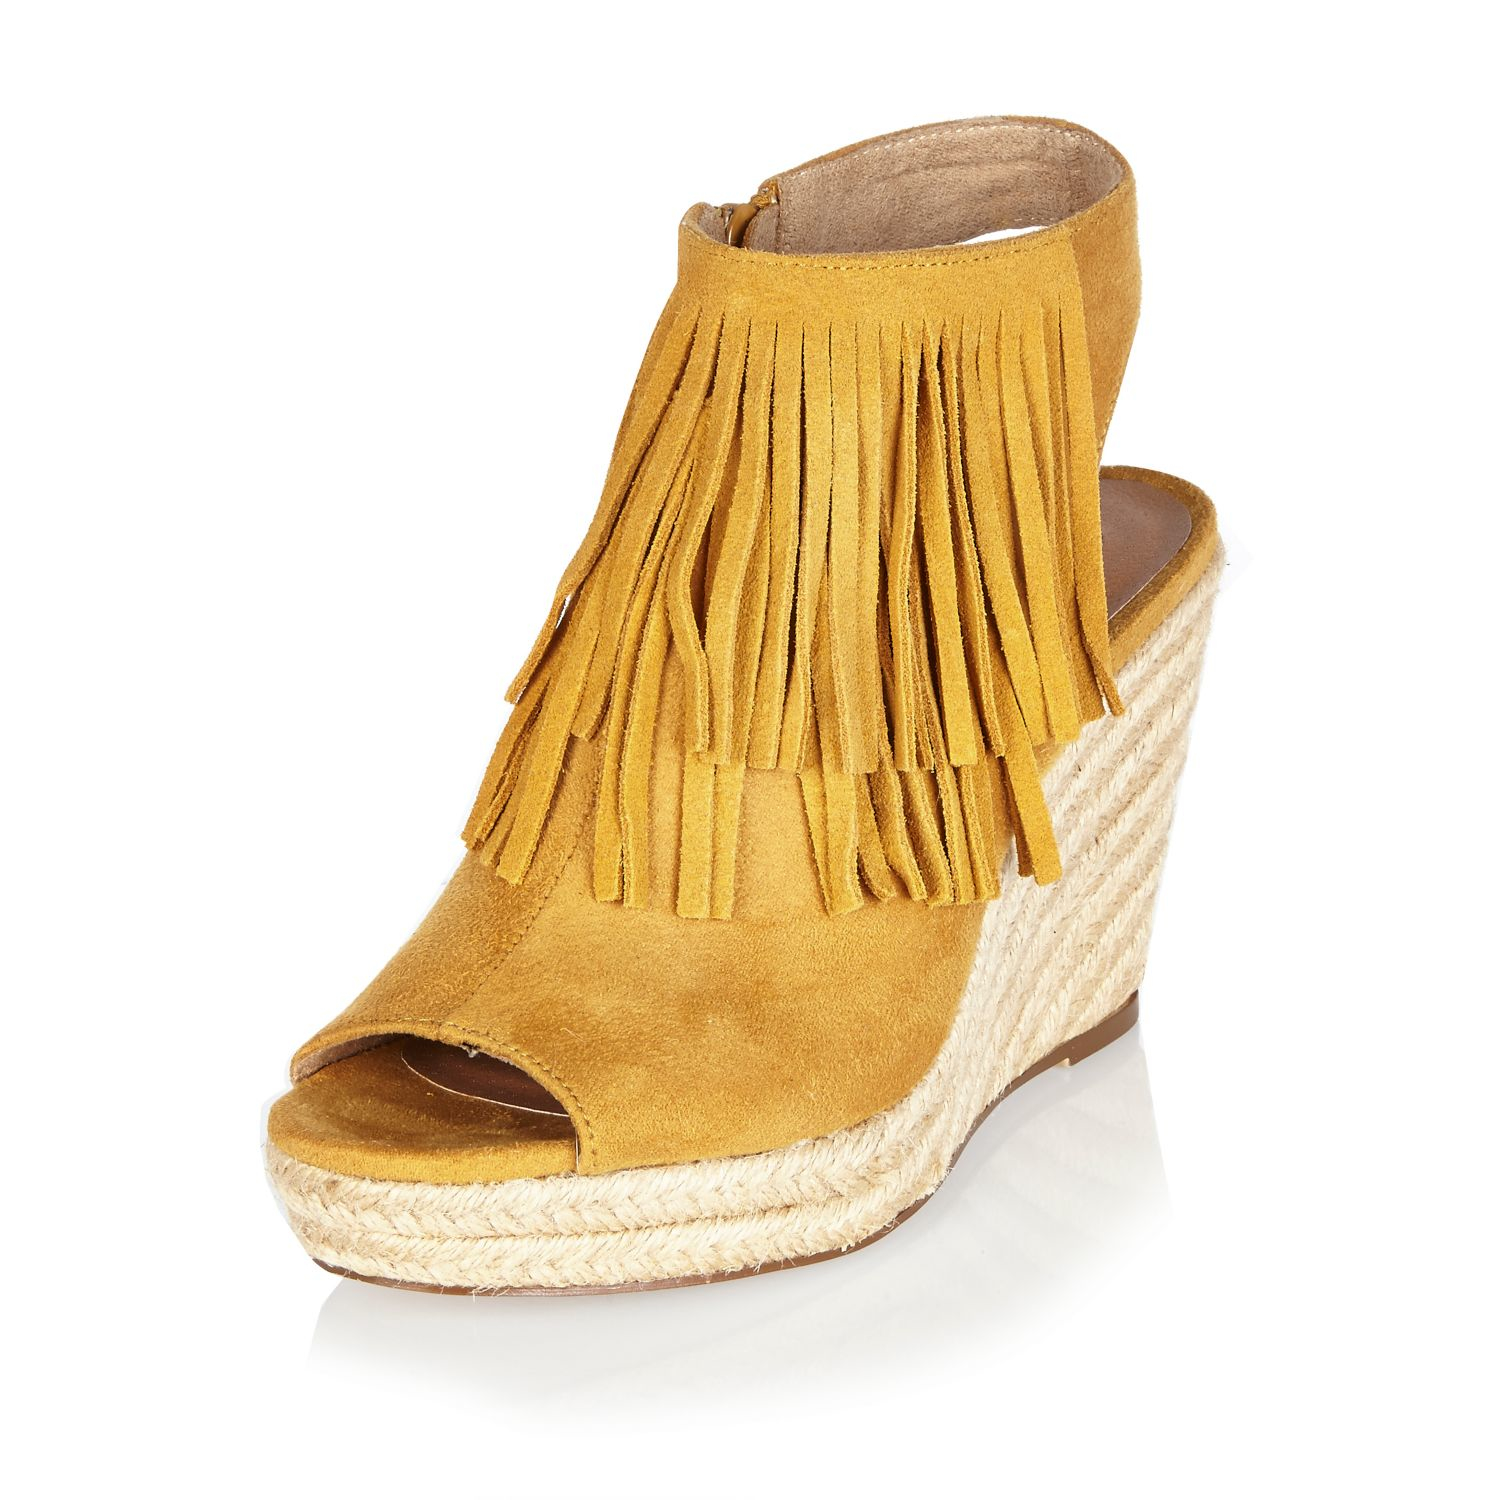 River Island Yellow Fringed Slingback Wedges in Yellow - Lyst1500 x 1500